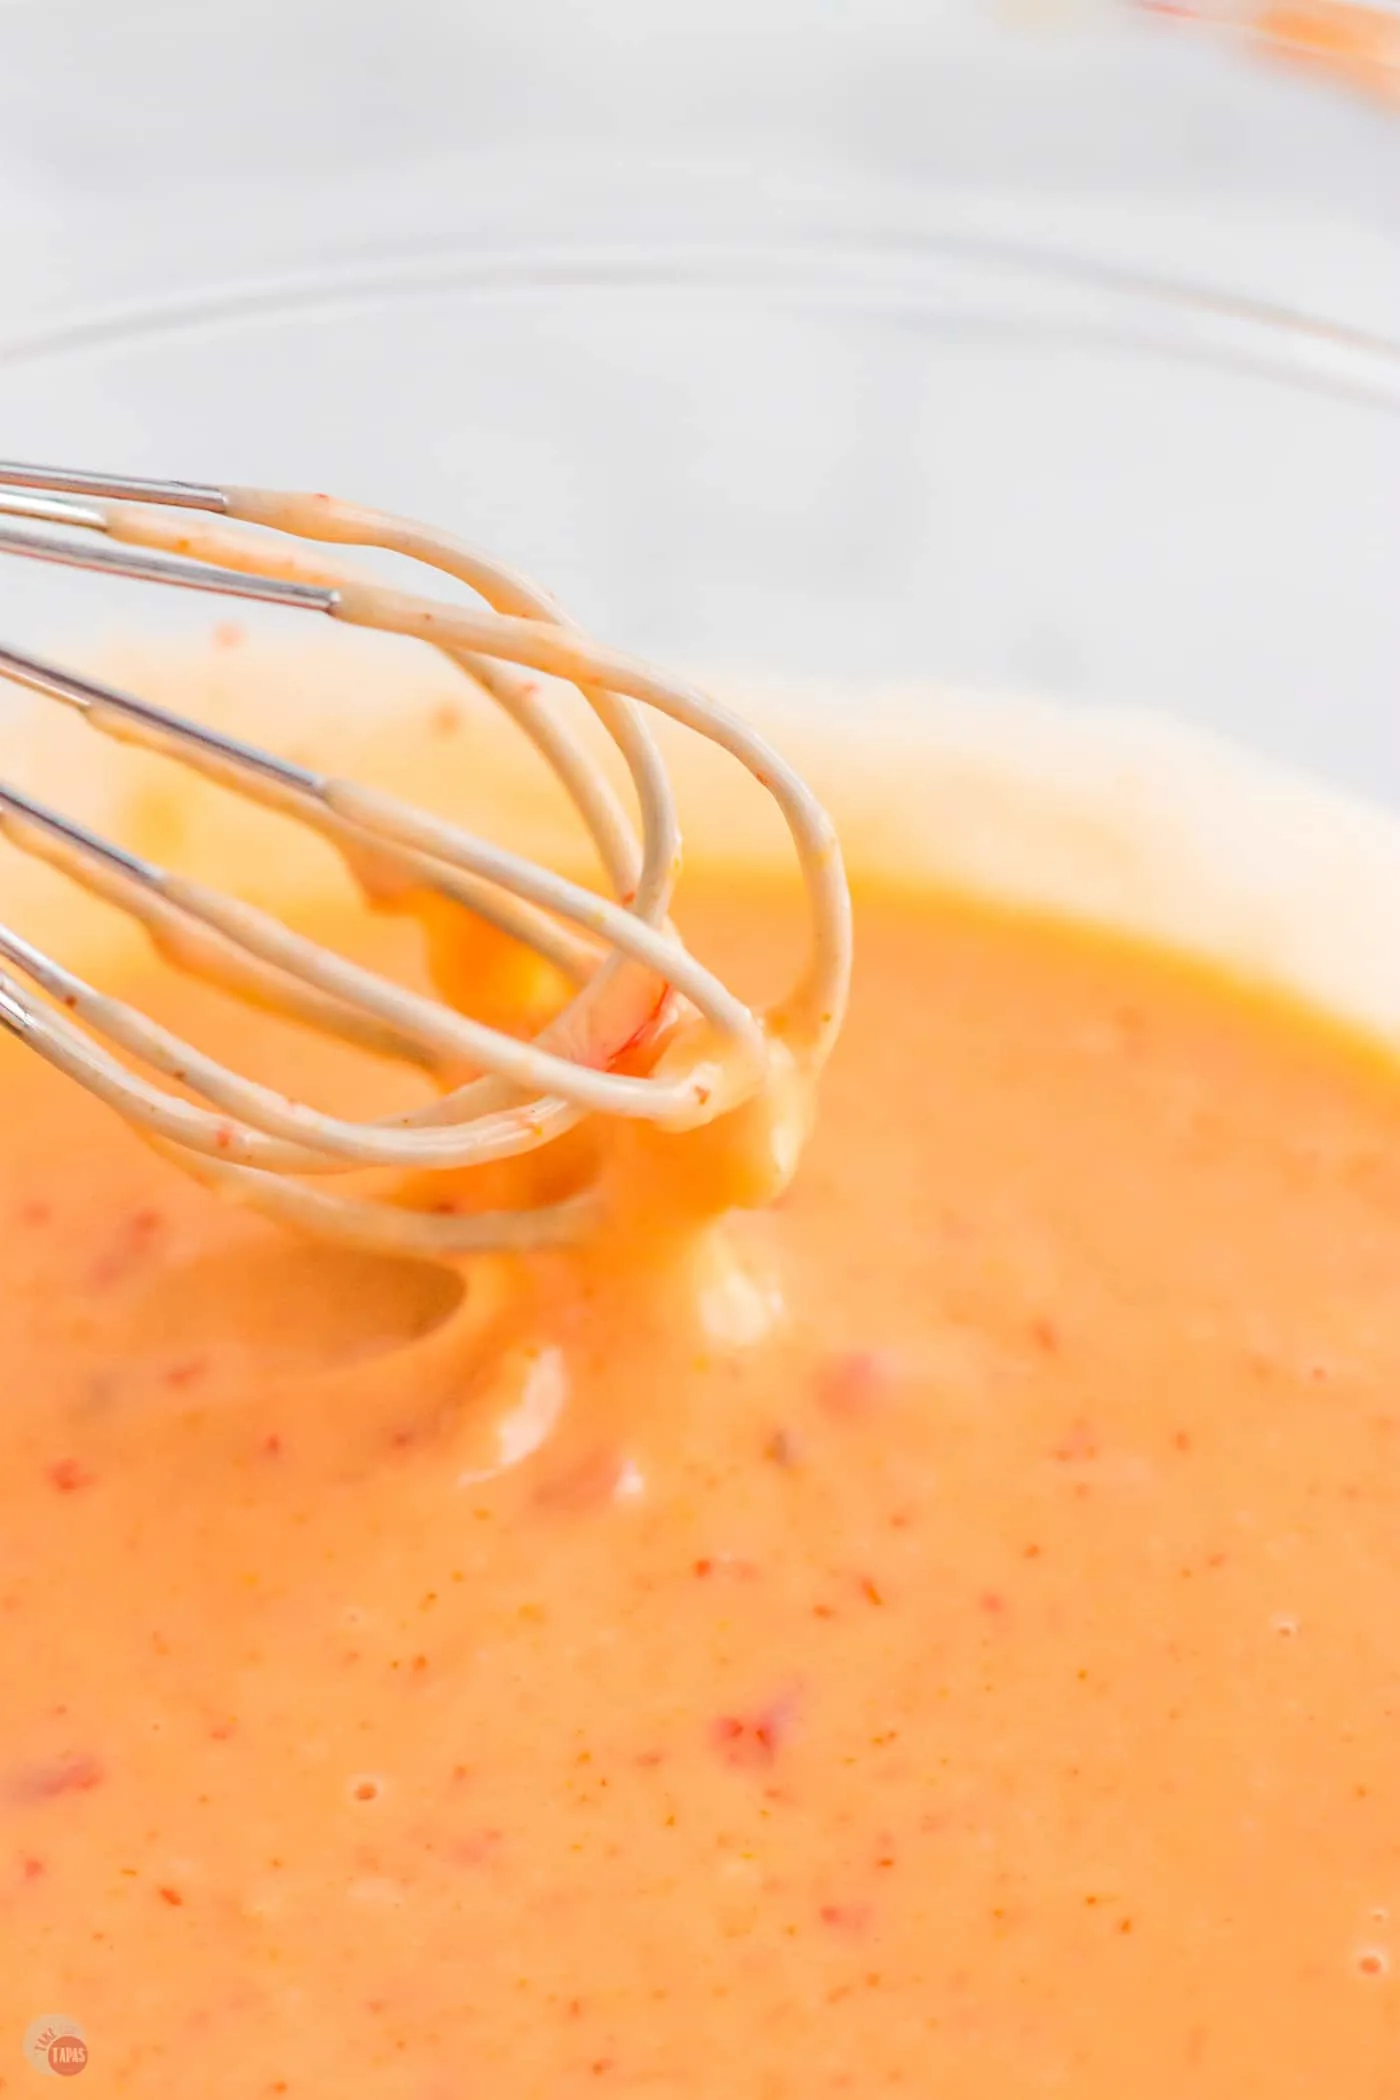 whisk dipping into sauce